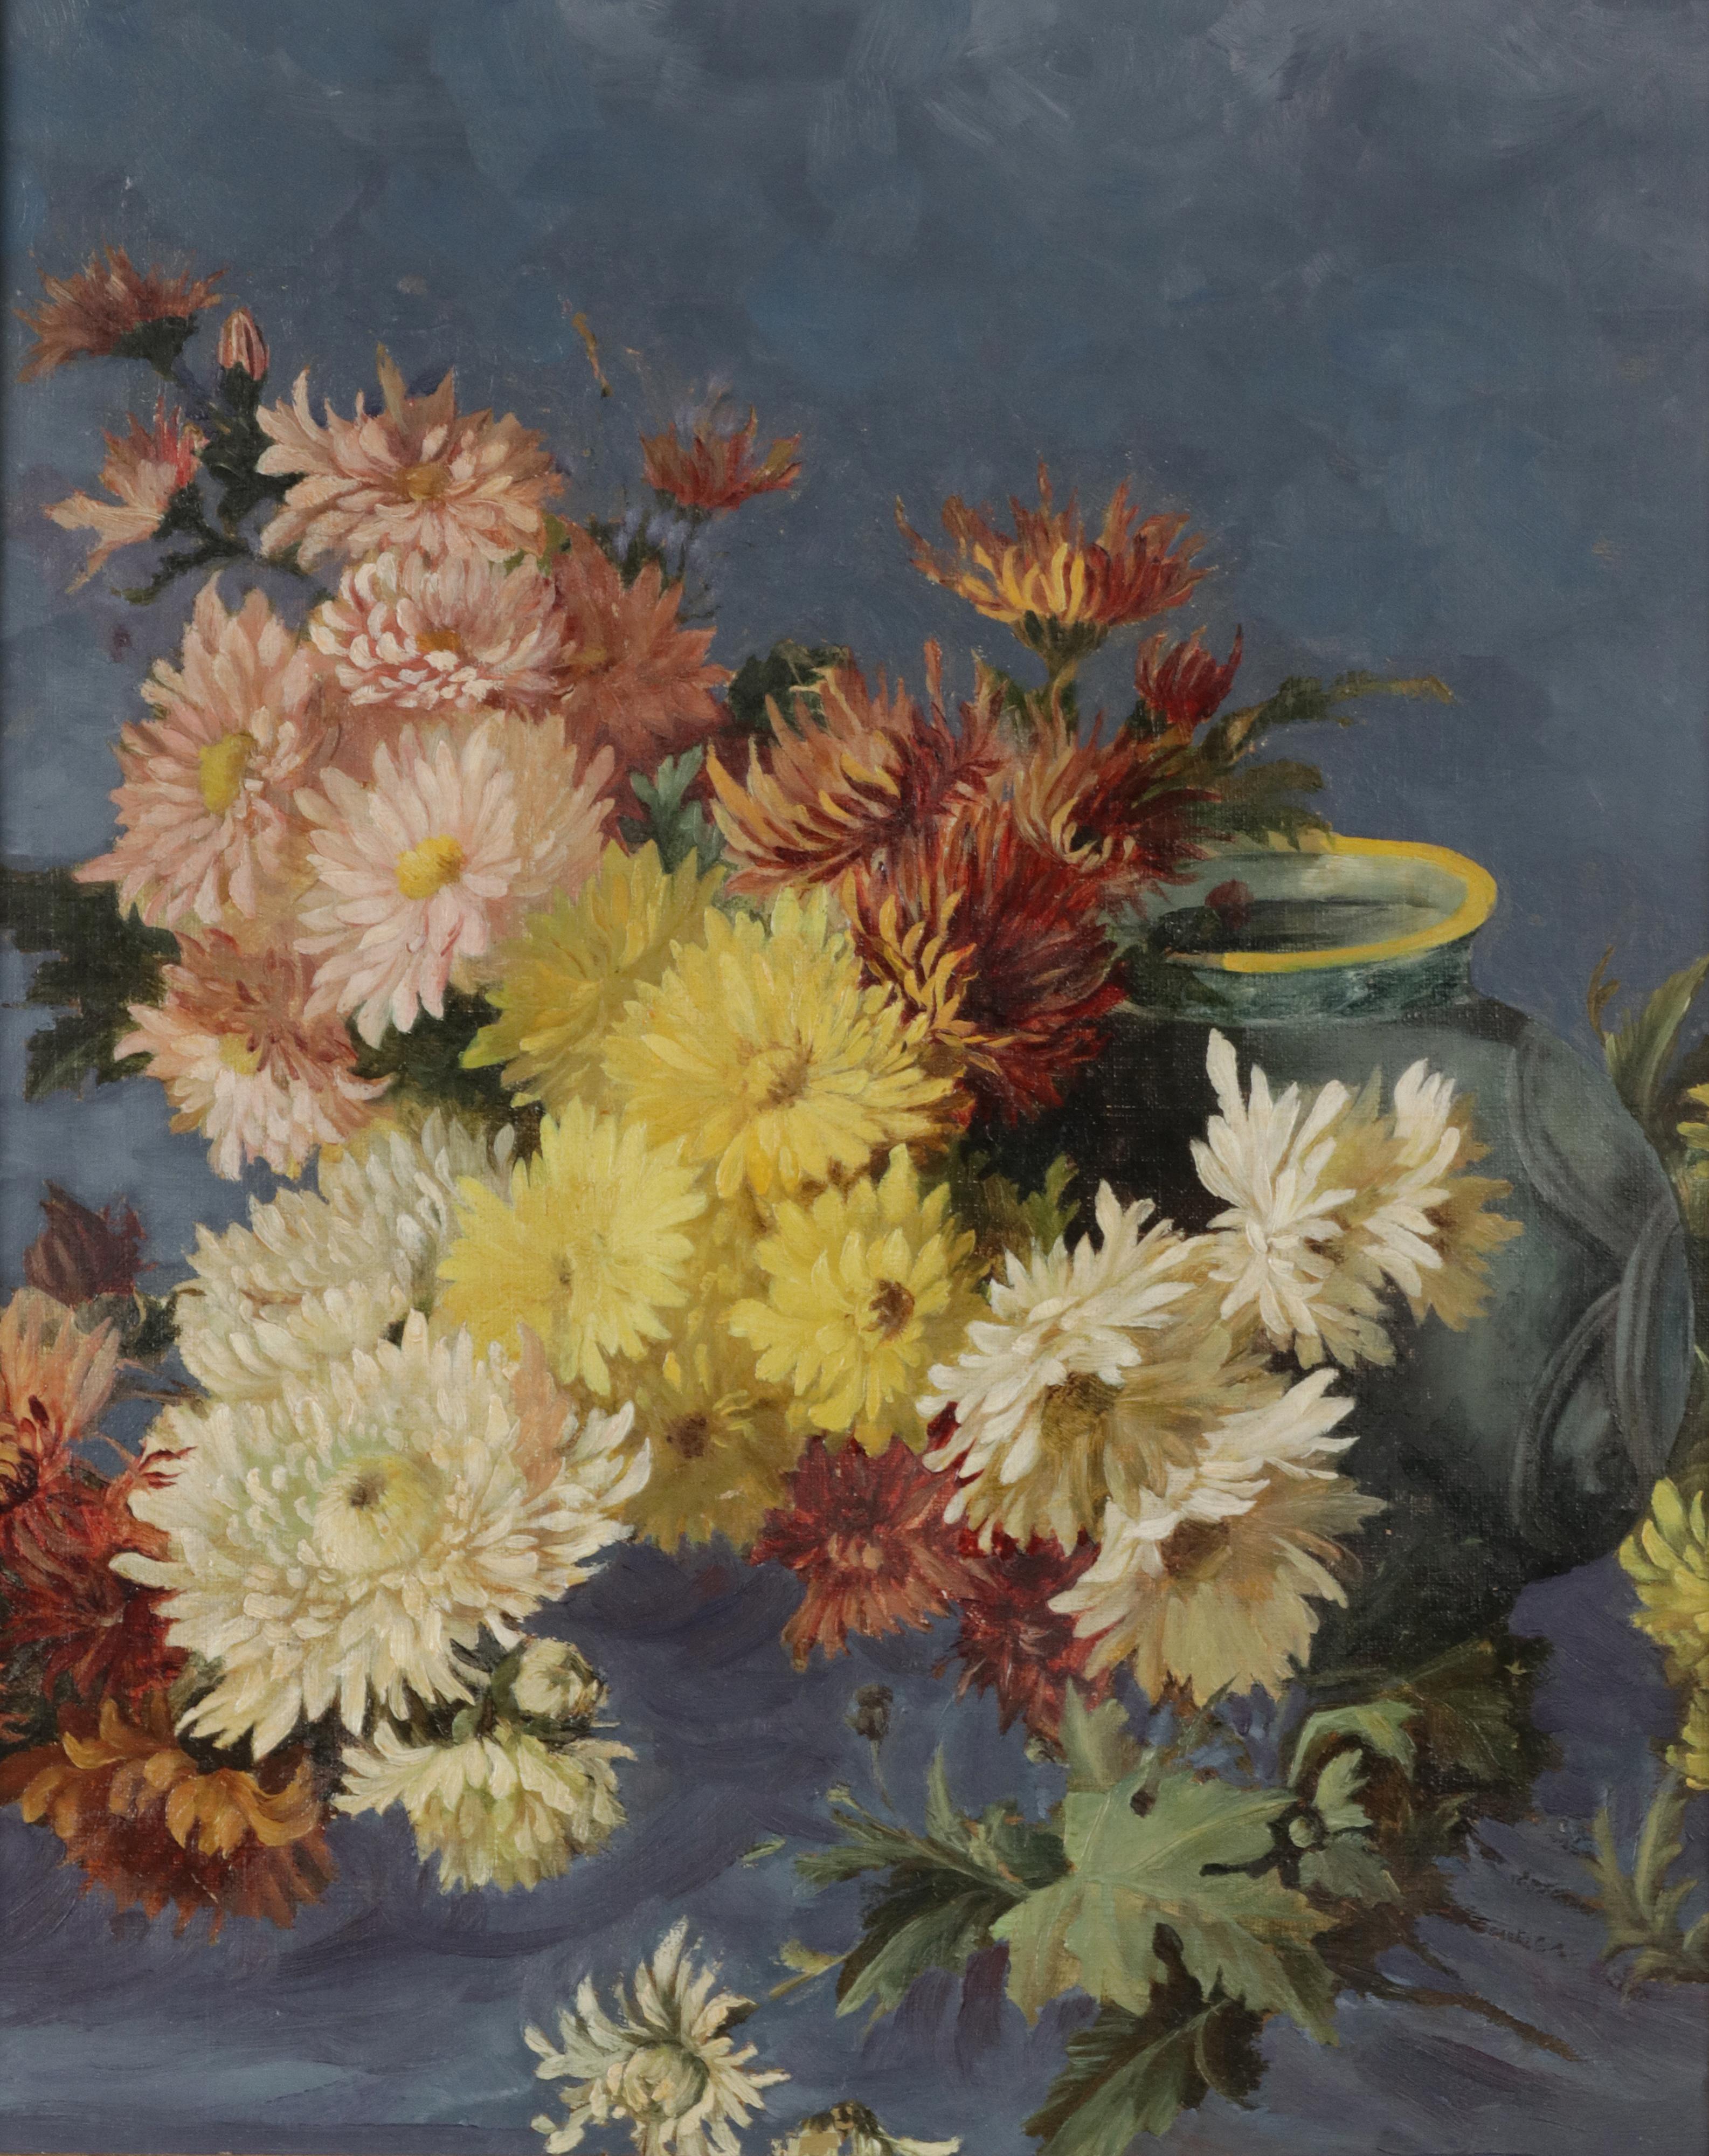 A flower still life, painted with oil on hardboard. The painting has no signature, artist unknown. Beautiful composition of the flowers with a ceramic flowerpot in the back. The painting has an antique frame, circa 18980-1900. The painting itself is